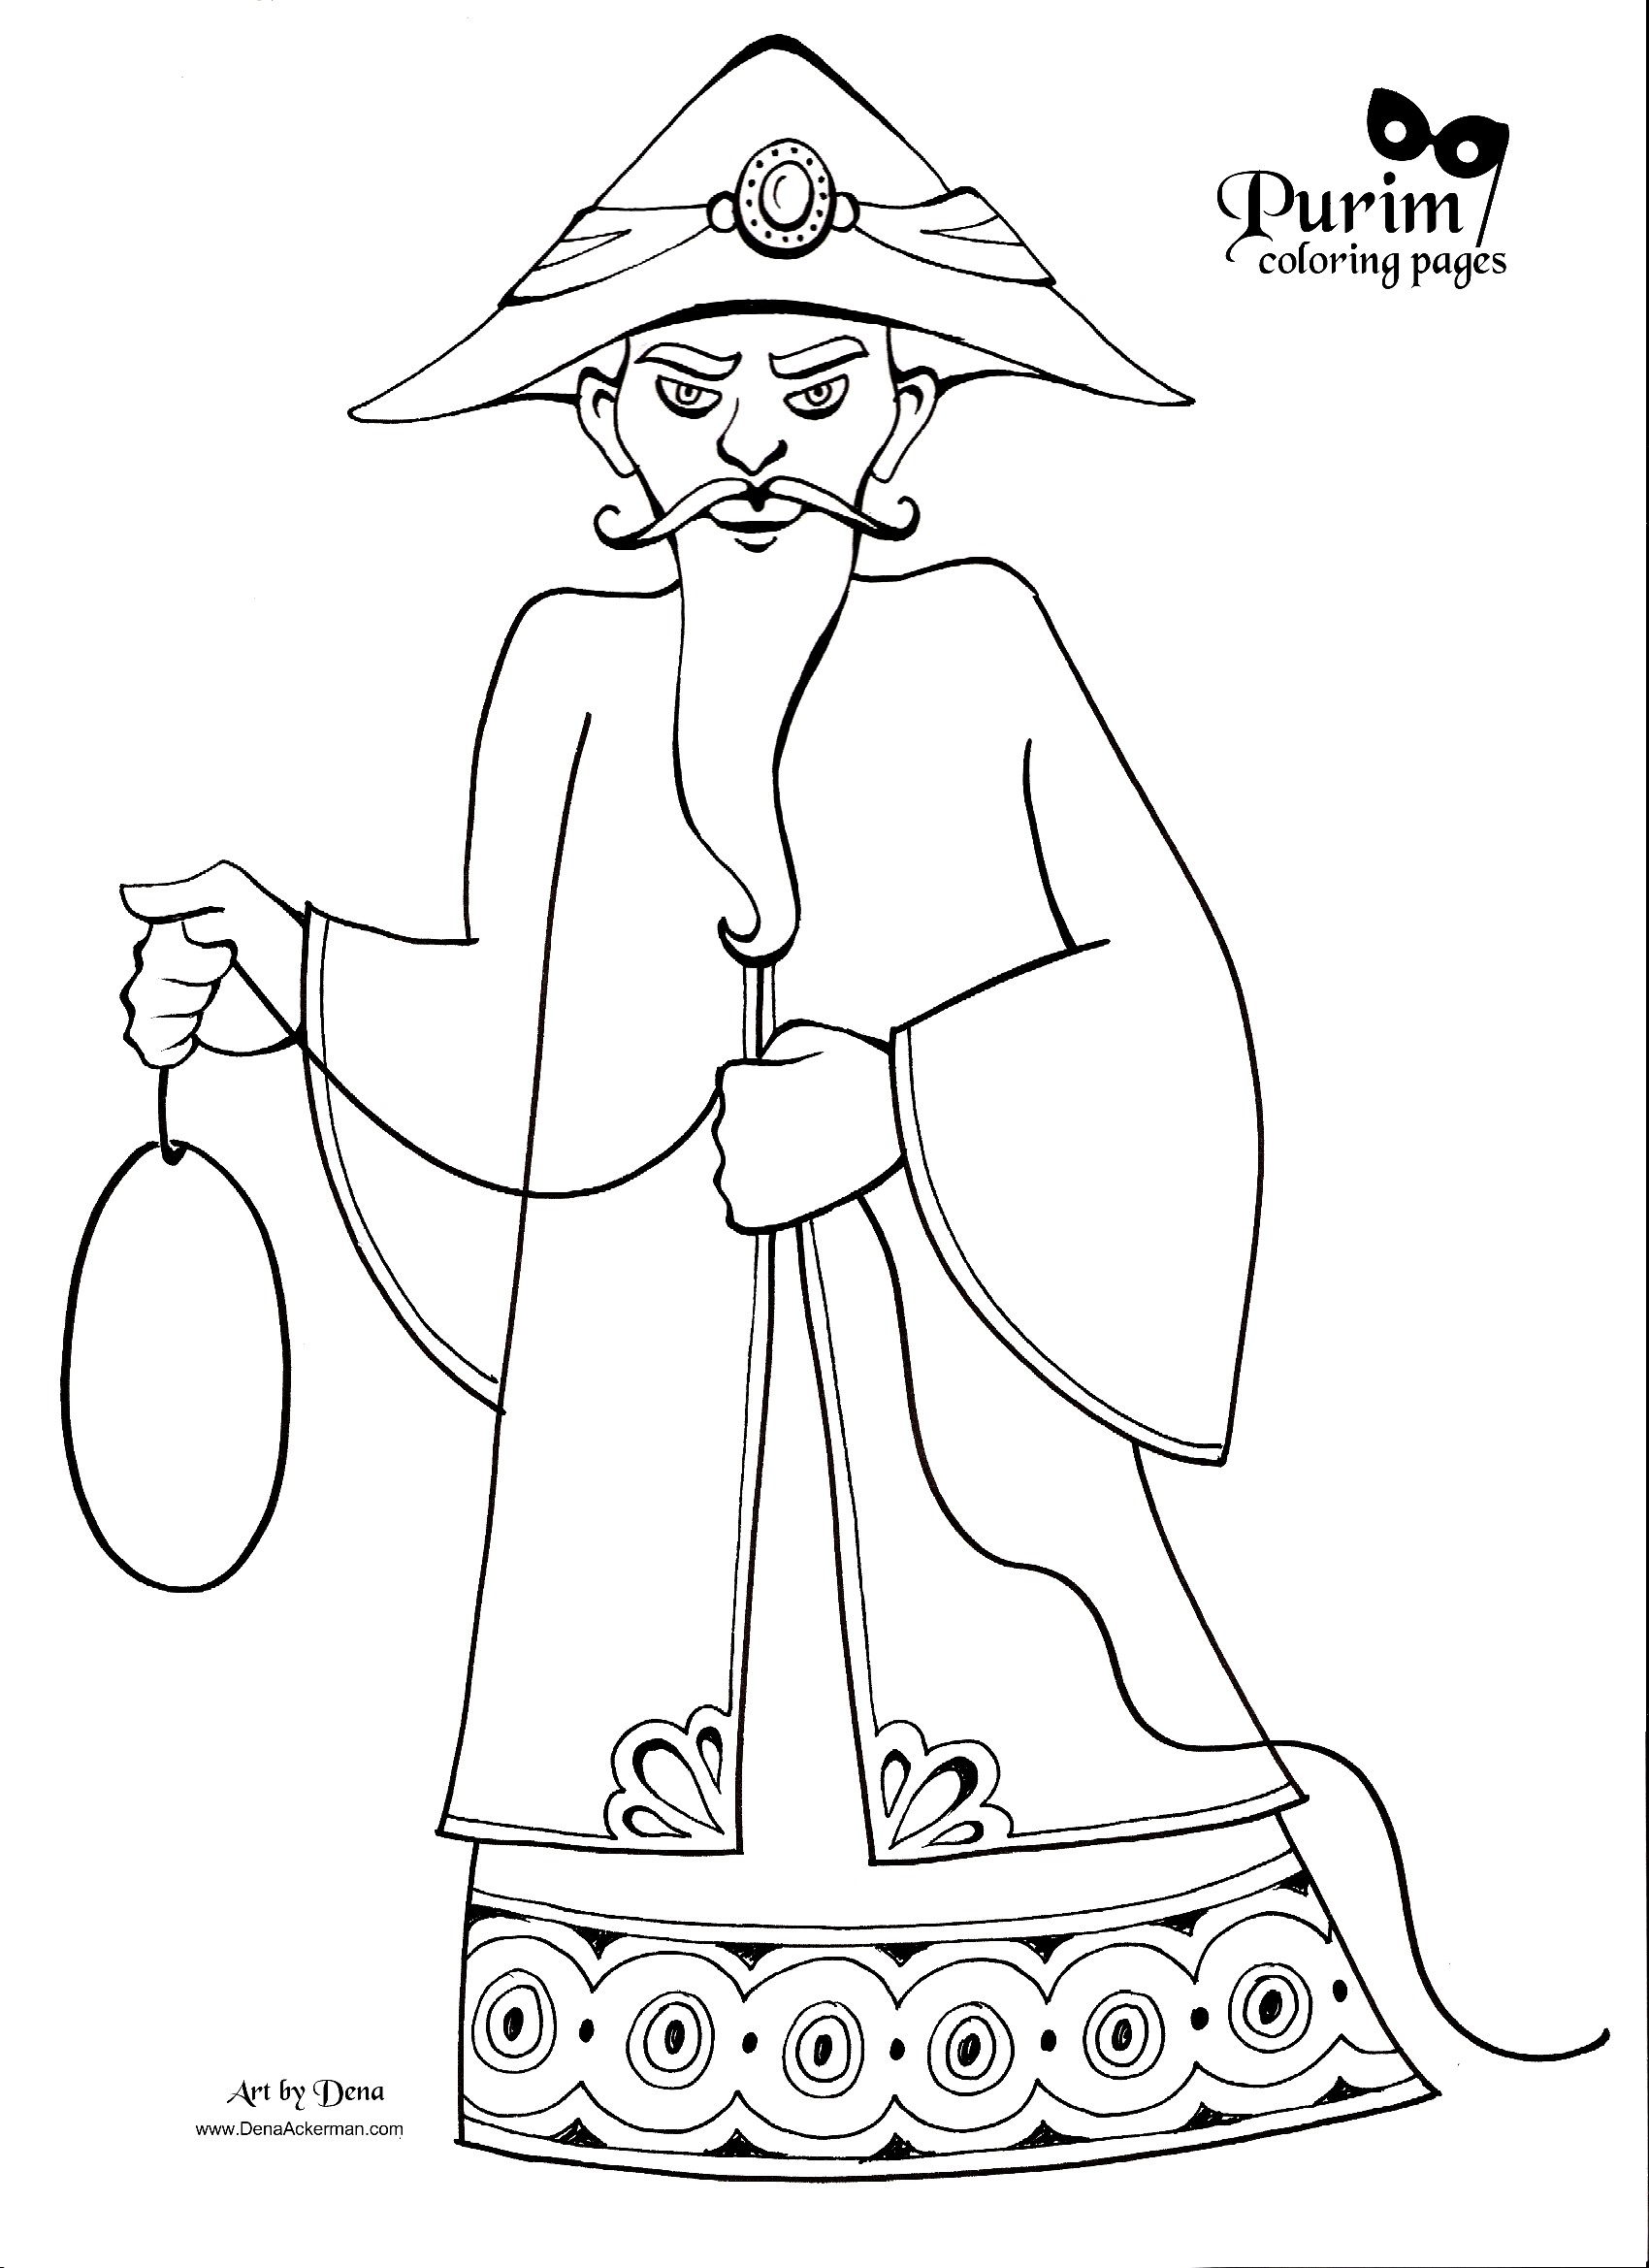 purim-coloring-pages-to-download-and-print-for-free